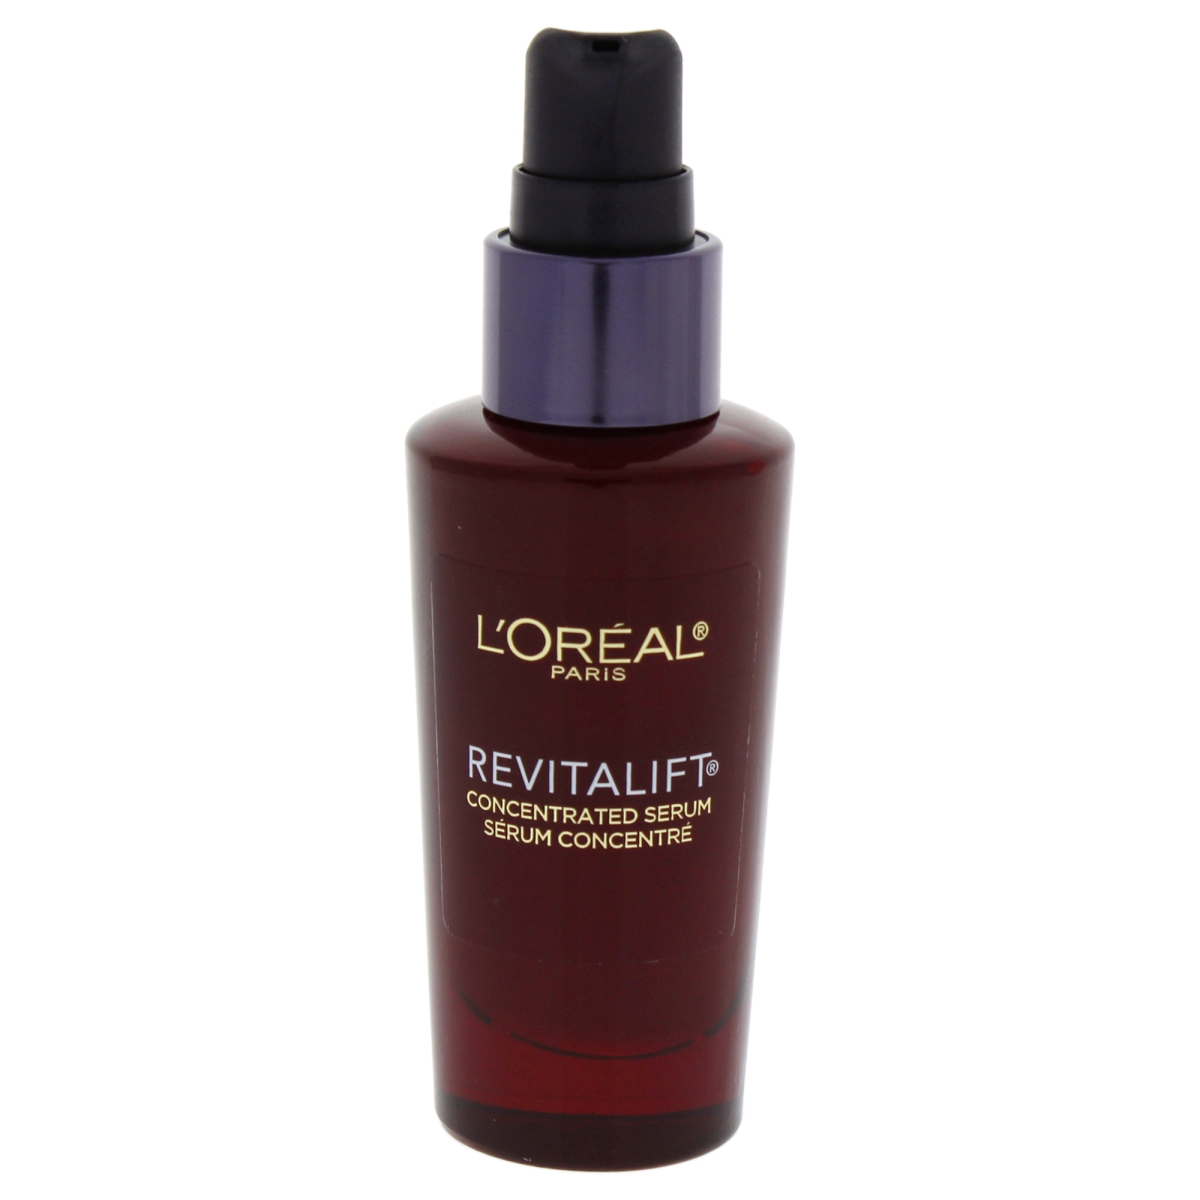 L'Oreal U-SC-4717 1 oz RevitaLift Triple Power Concentrated Serum for Unisex